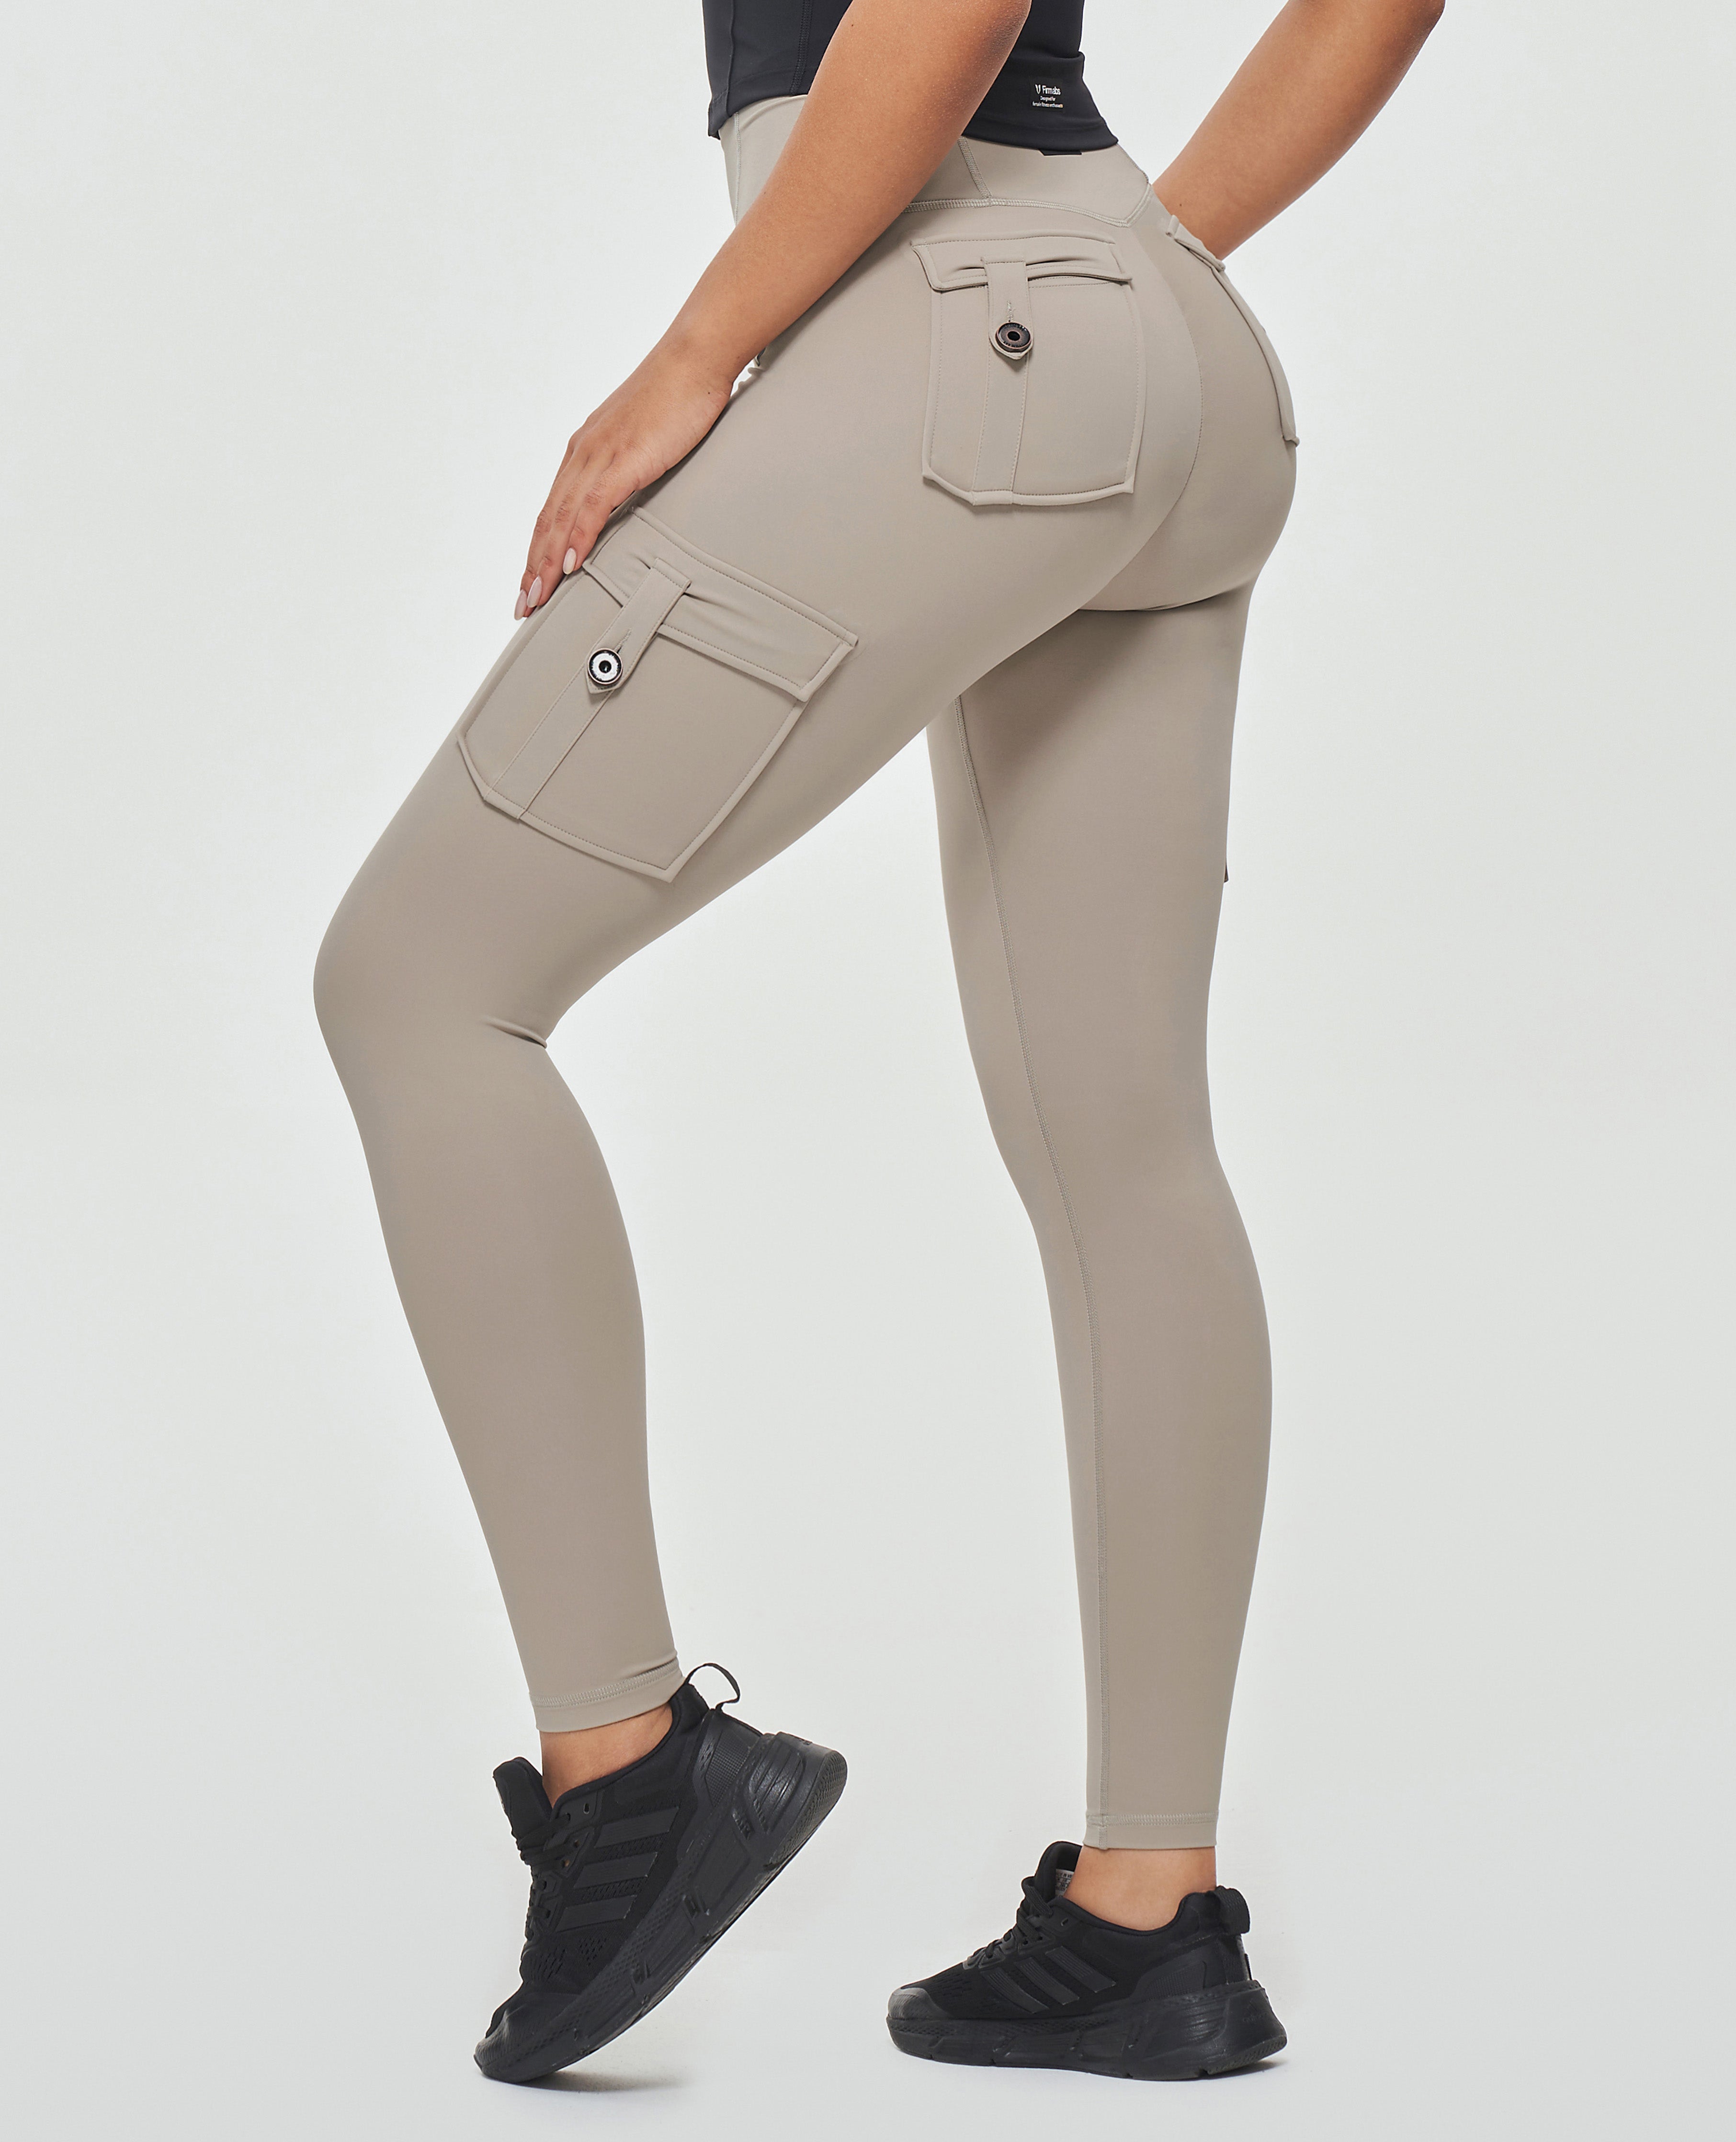 COMFY ONE Seamless Leggings with 4 Pockets for Women Compression Cargo  Pants for